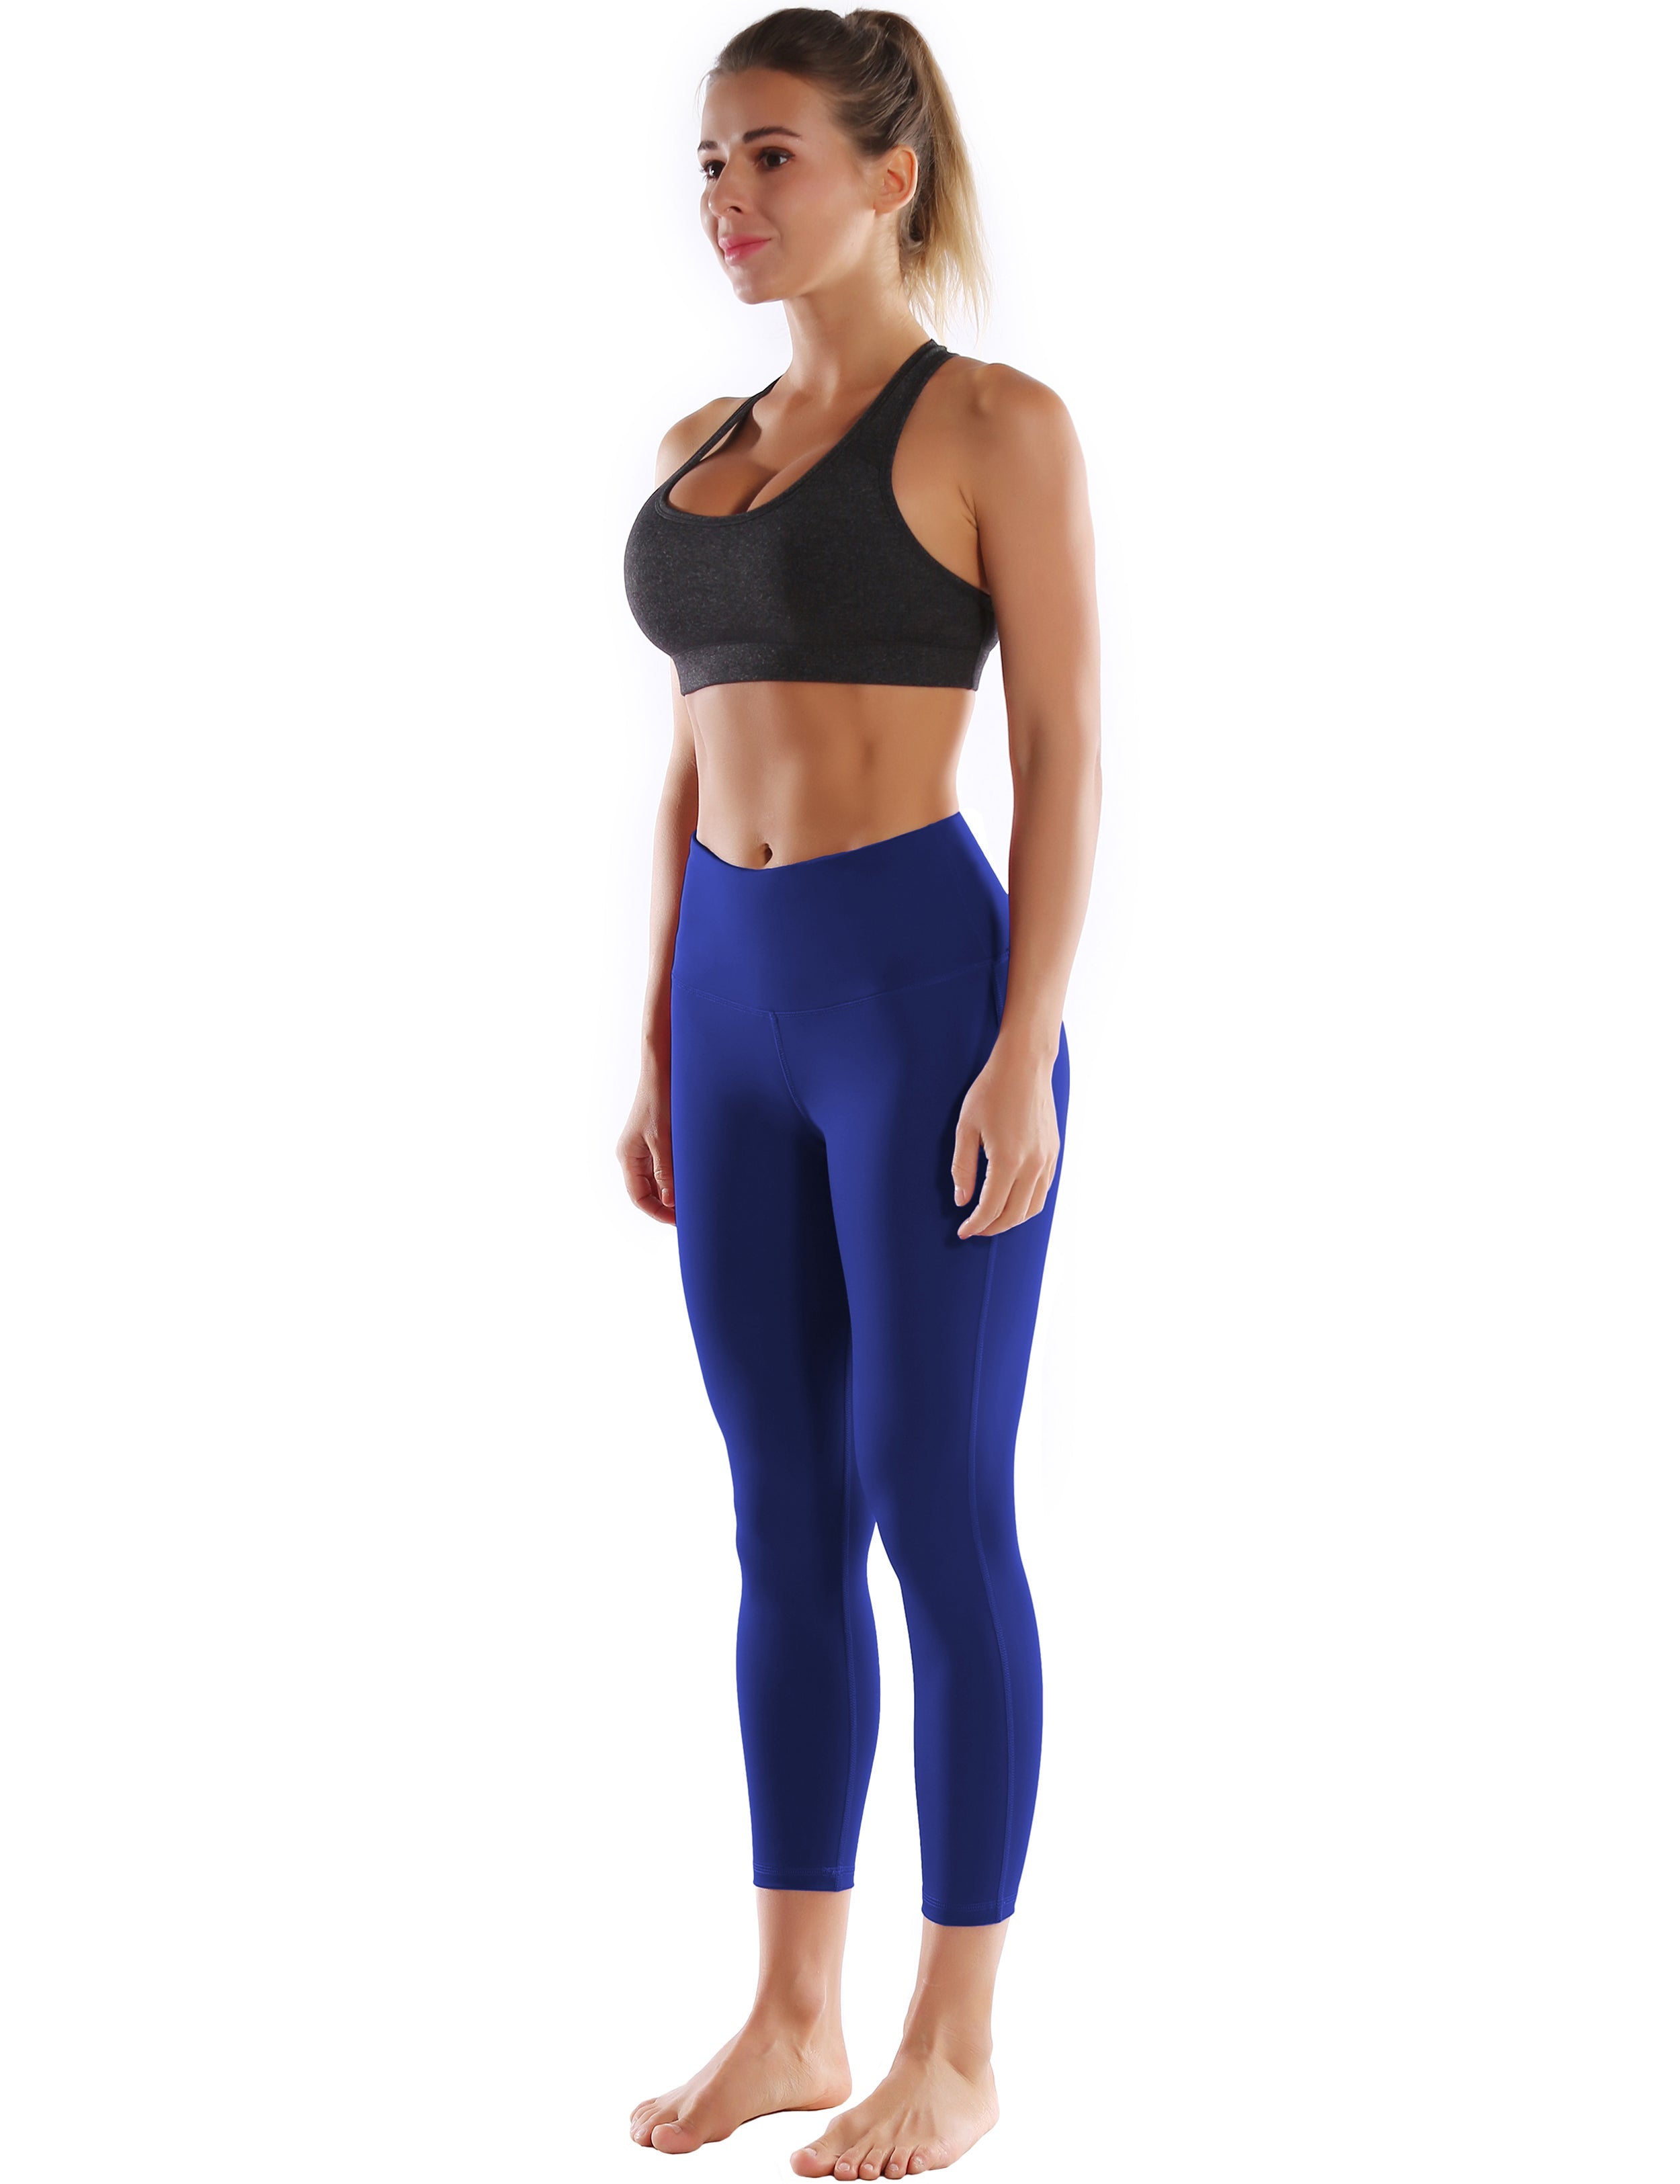 22" High Waist Side Line Capris navy 75%Nylon/25%Spandex Fabric doesn't attract lint easily 4-way stretch No see-through Moisture-wicking Tummy control Inner pocket